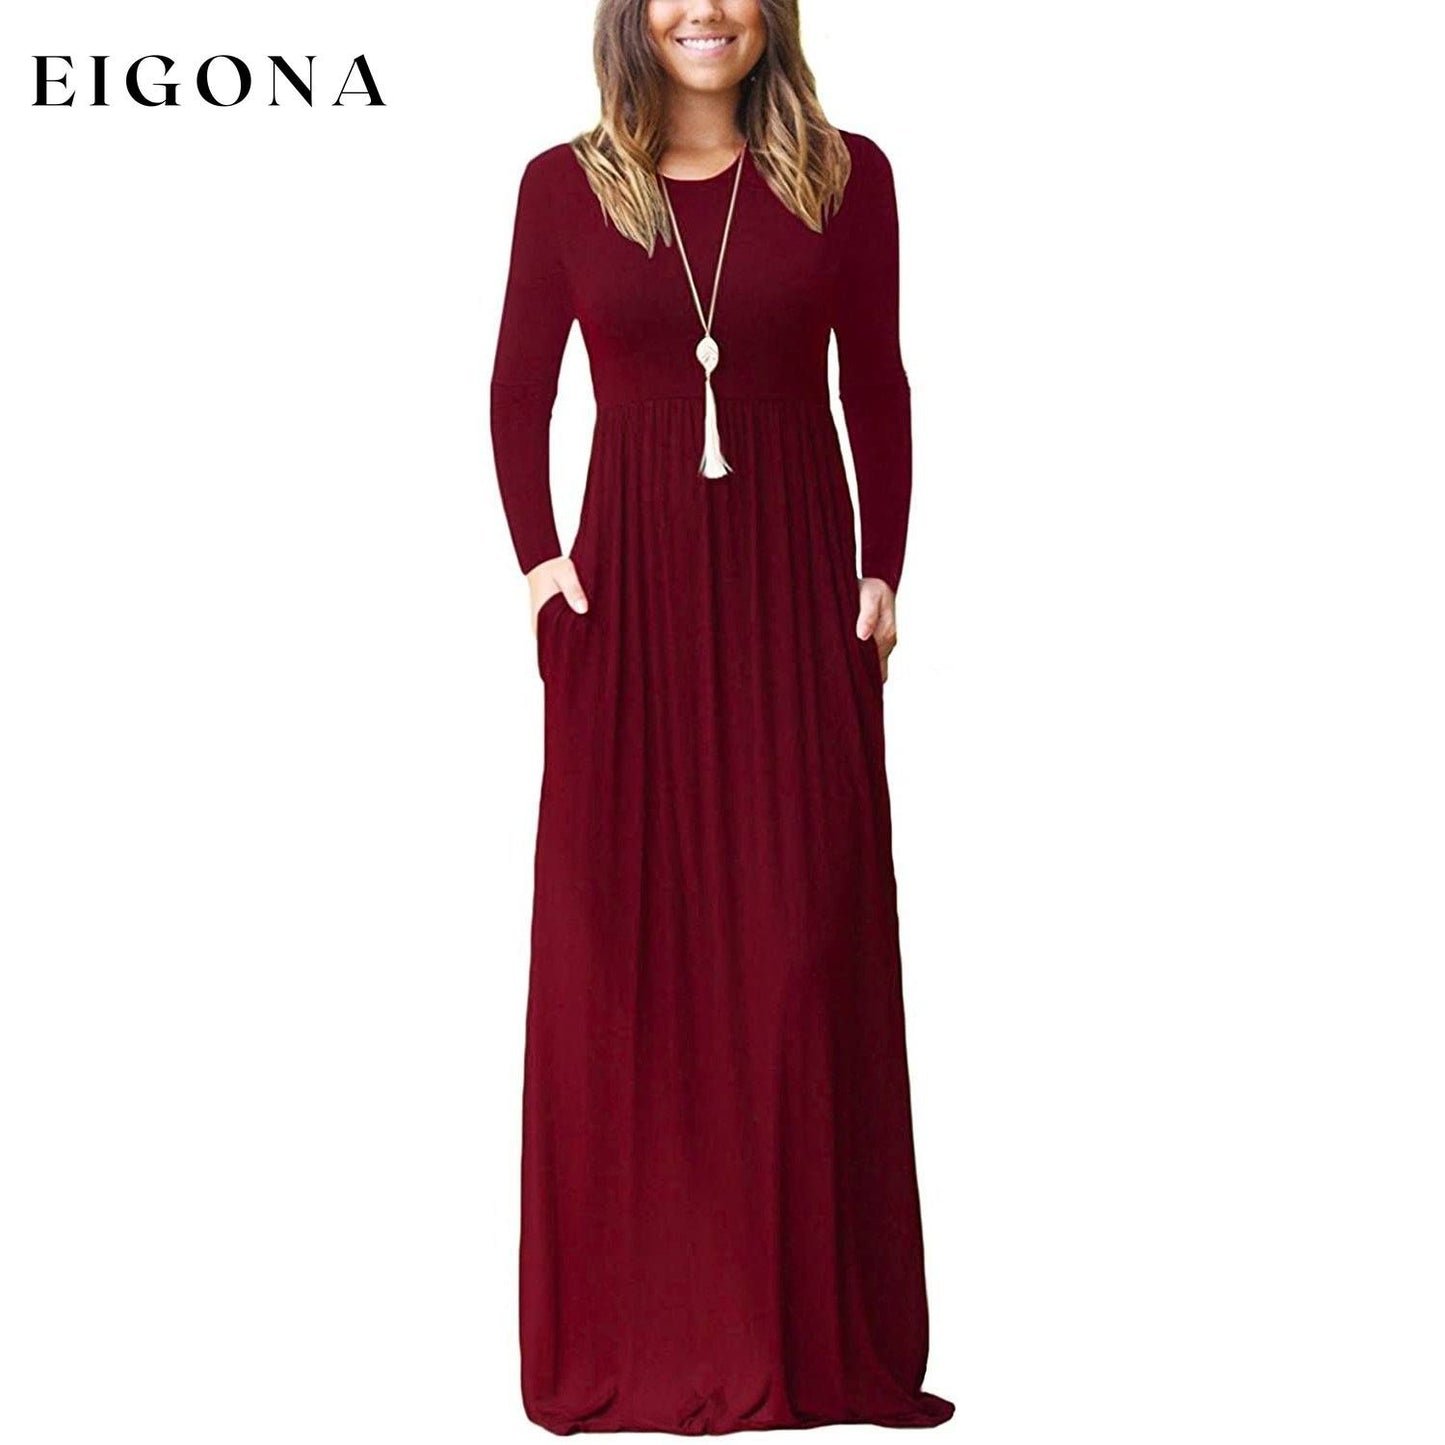 Women Long Sleeve Loose Plain Maxi Dresses Casual Long Dresses with Pockets Wine Red __stock:500 casual dresses clothes dresses refund_fee:1200 show-color-swatches